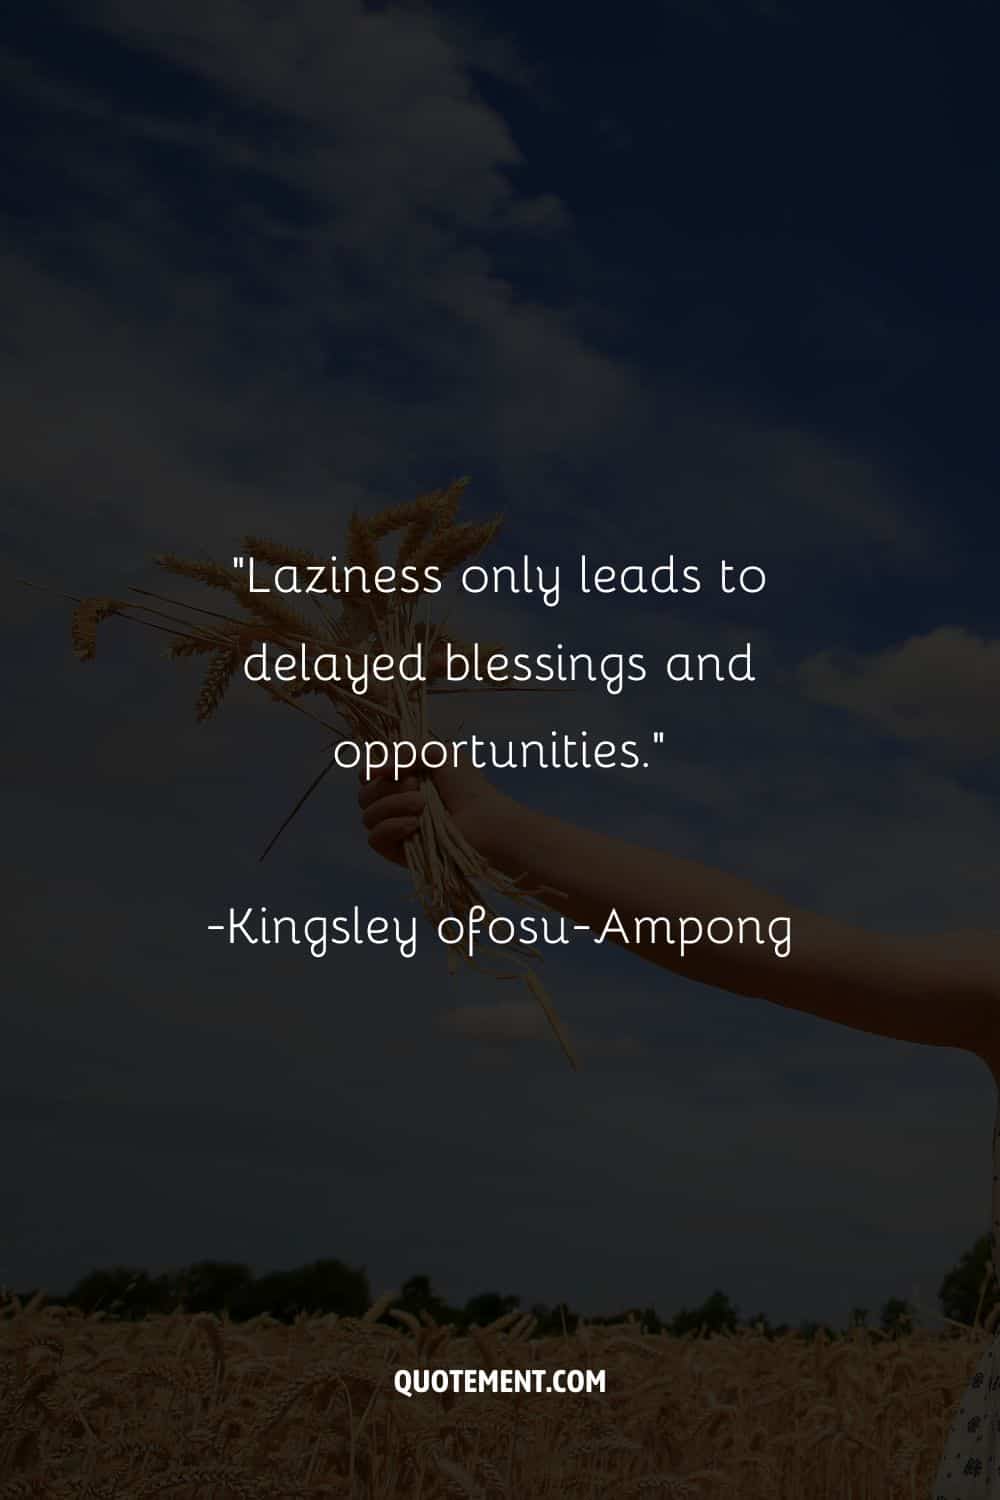 “Laziness only leads to delayed blessings and opportunities.”